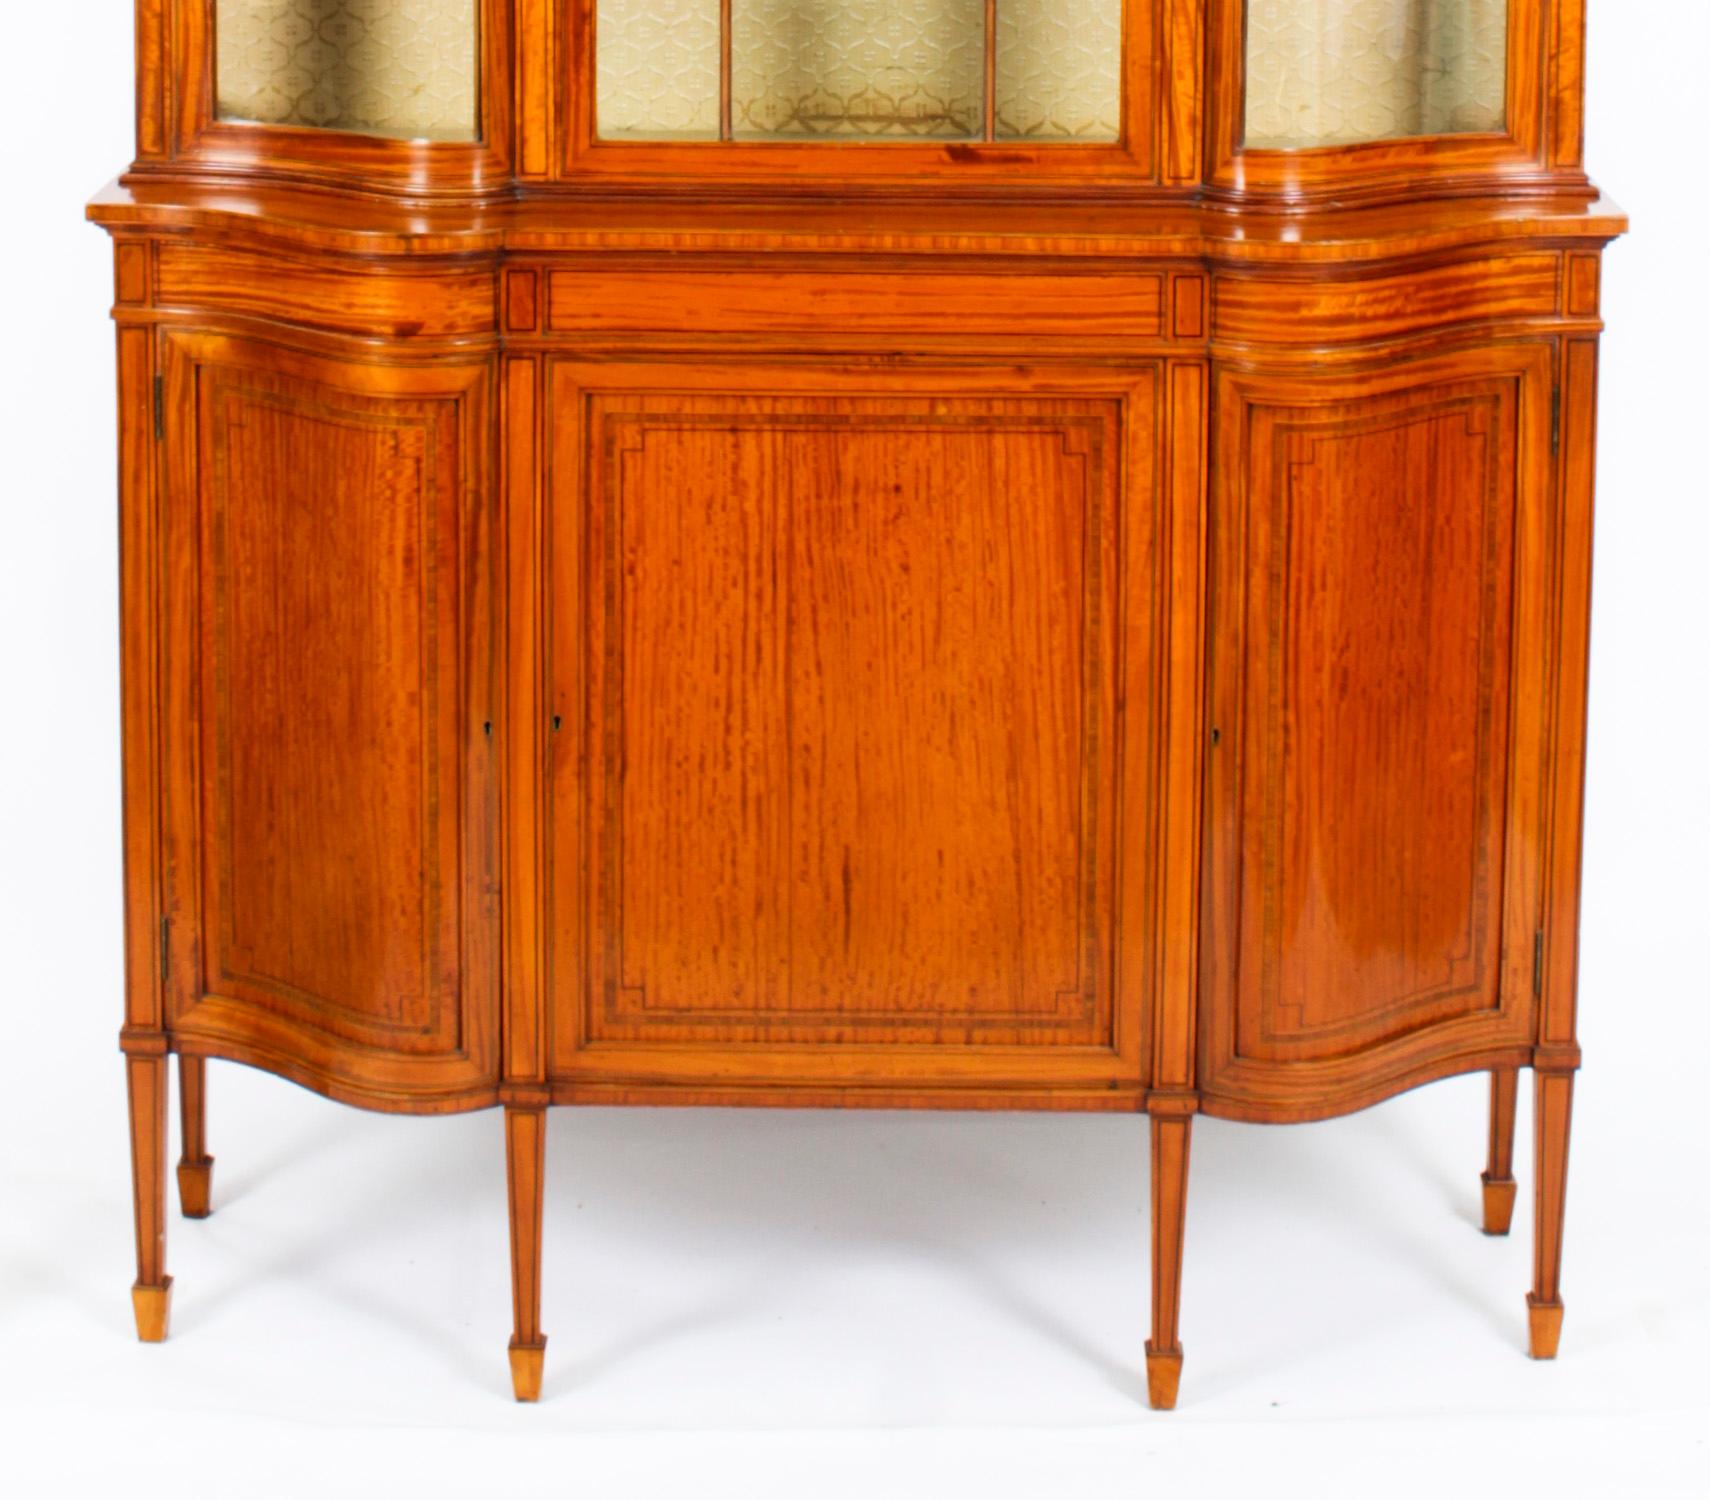 English Antique Edwardian Serpentine Satinwood Inlaid Display Cabinet 19th C For Sale